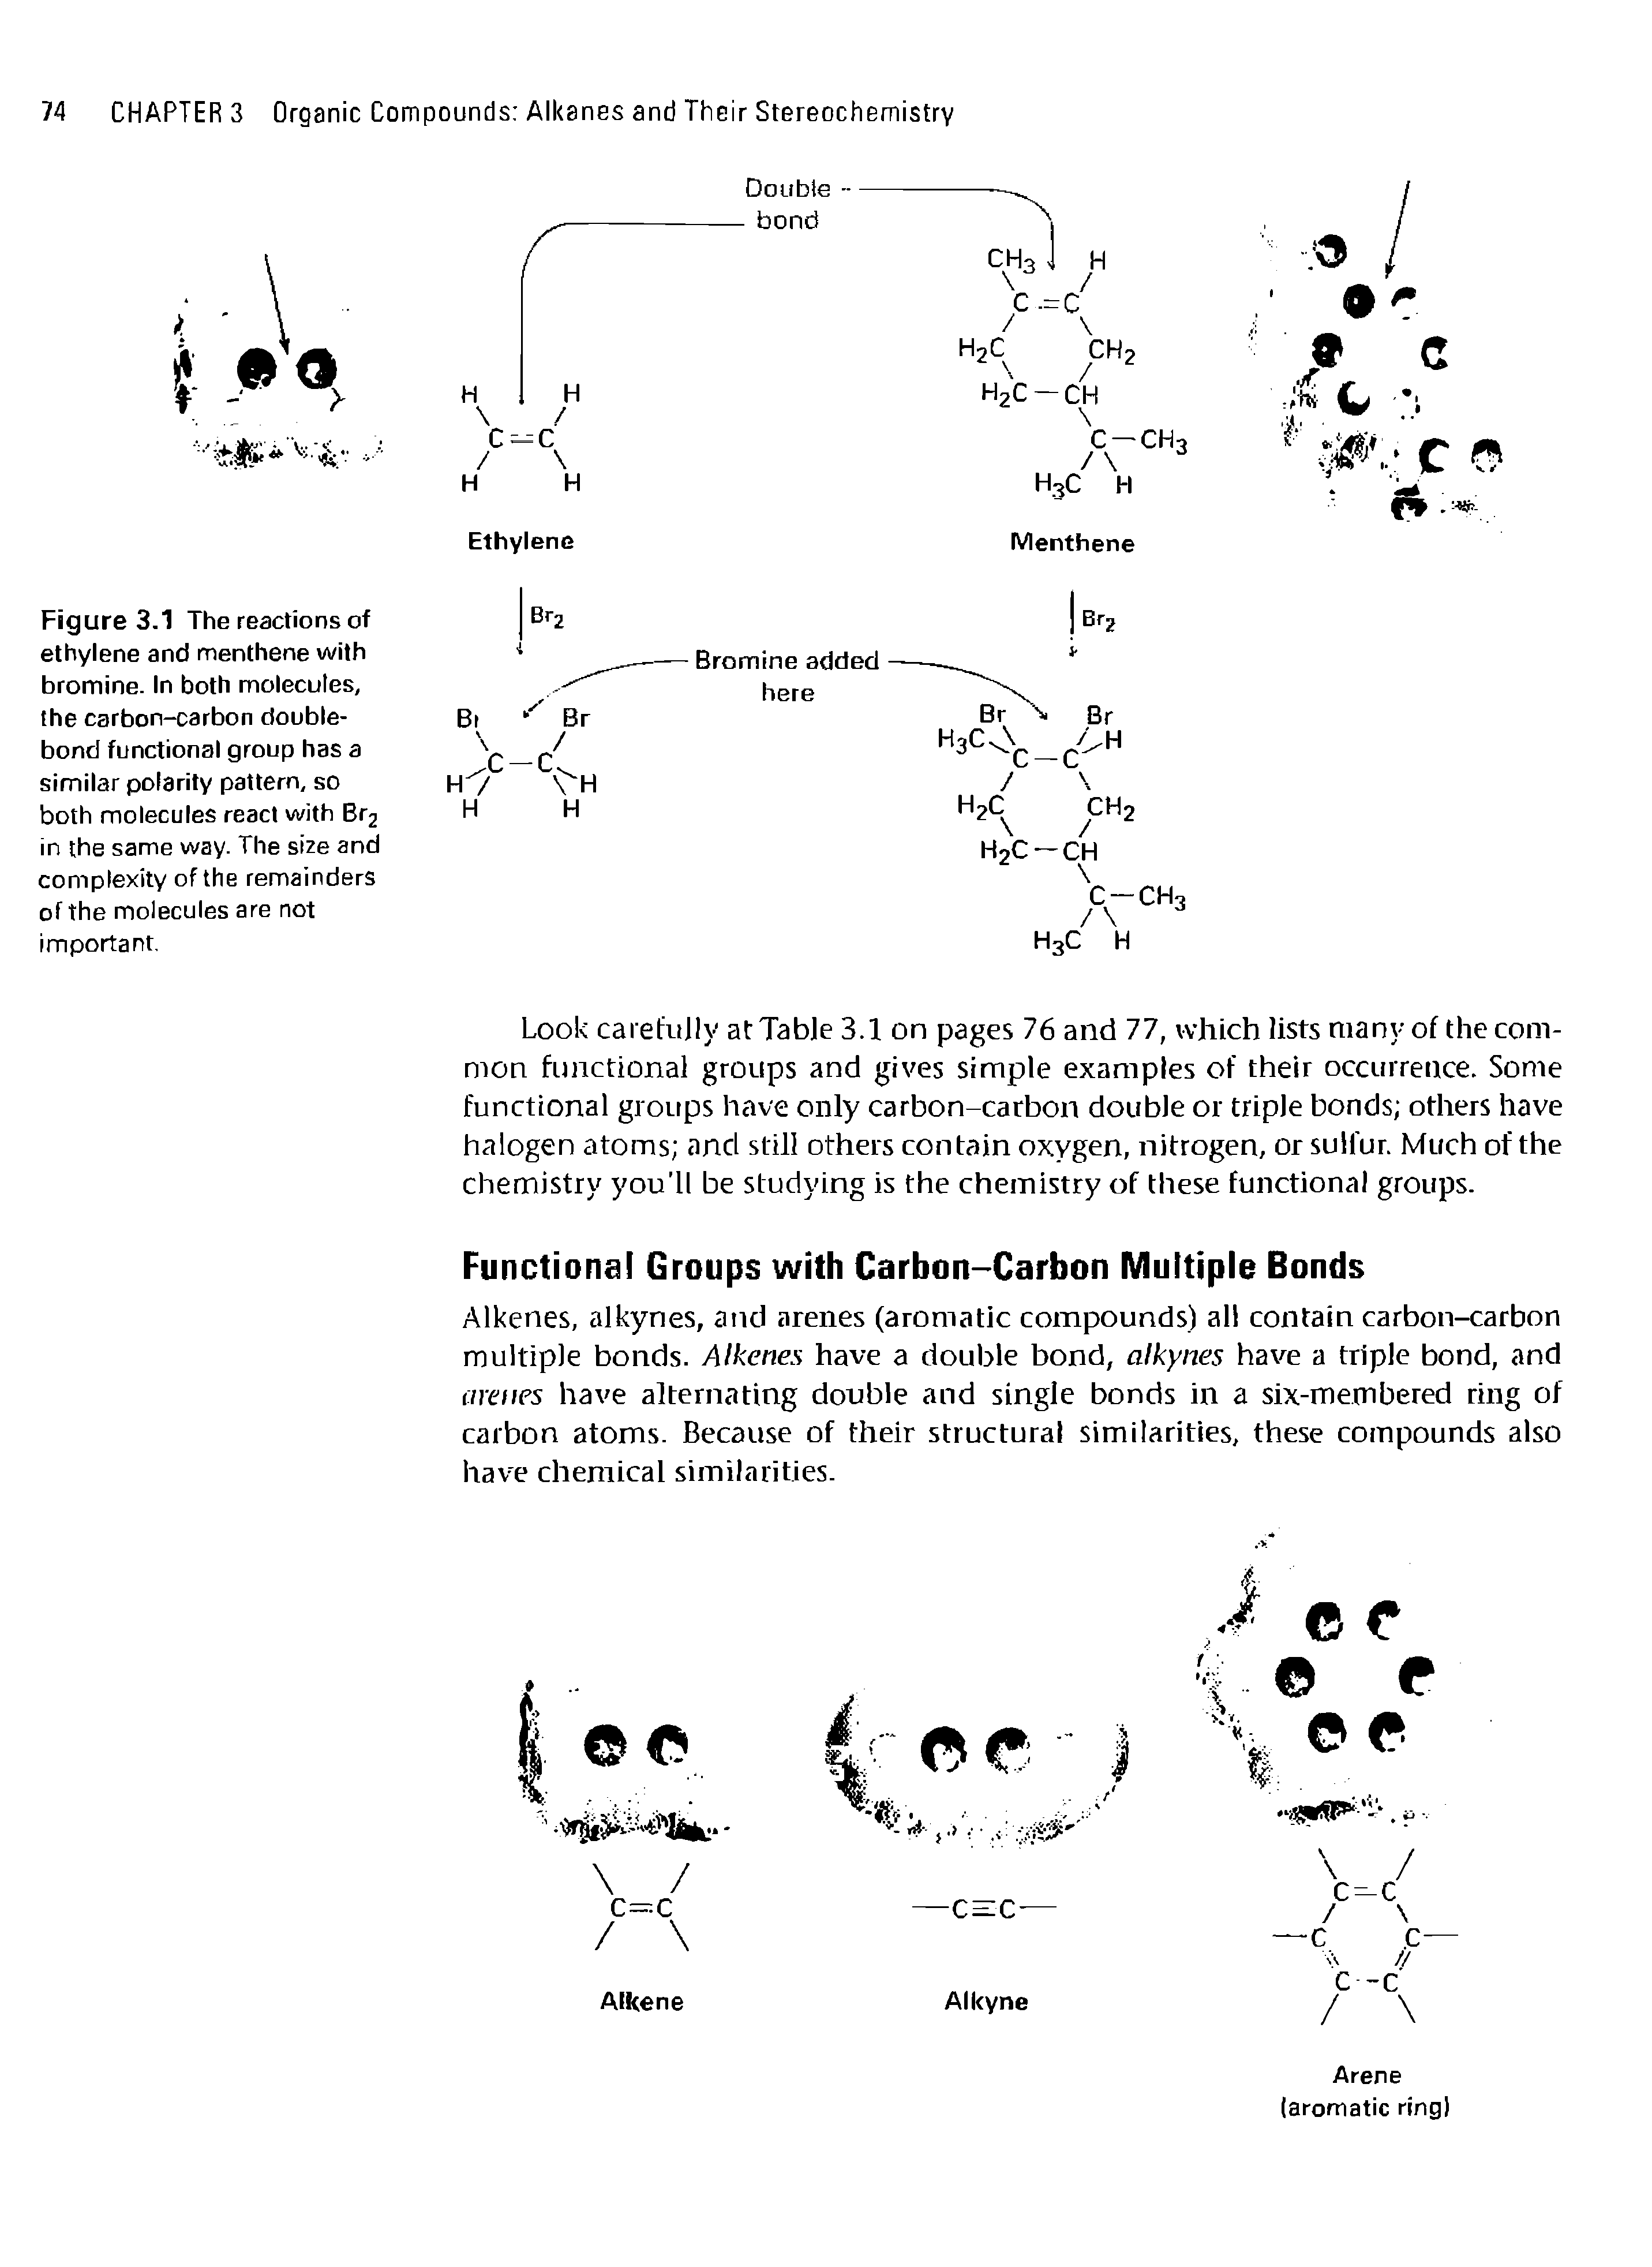 Figure 3.1 The reactions of ethylene and menthene with bromine. In both molecules, the carbon-carbon doublebond functional group has a similar polarity pattern, so both molecules react with Br2 in the same way. The size and complexity of the remainders of the molecules are not important.